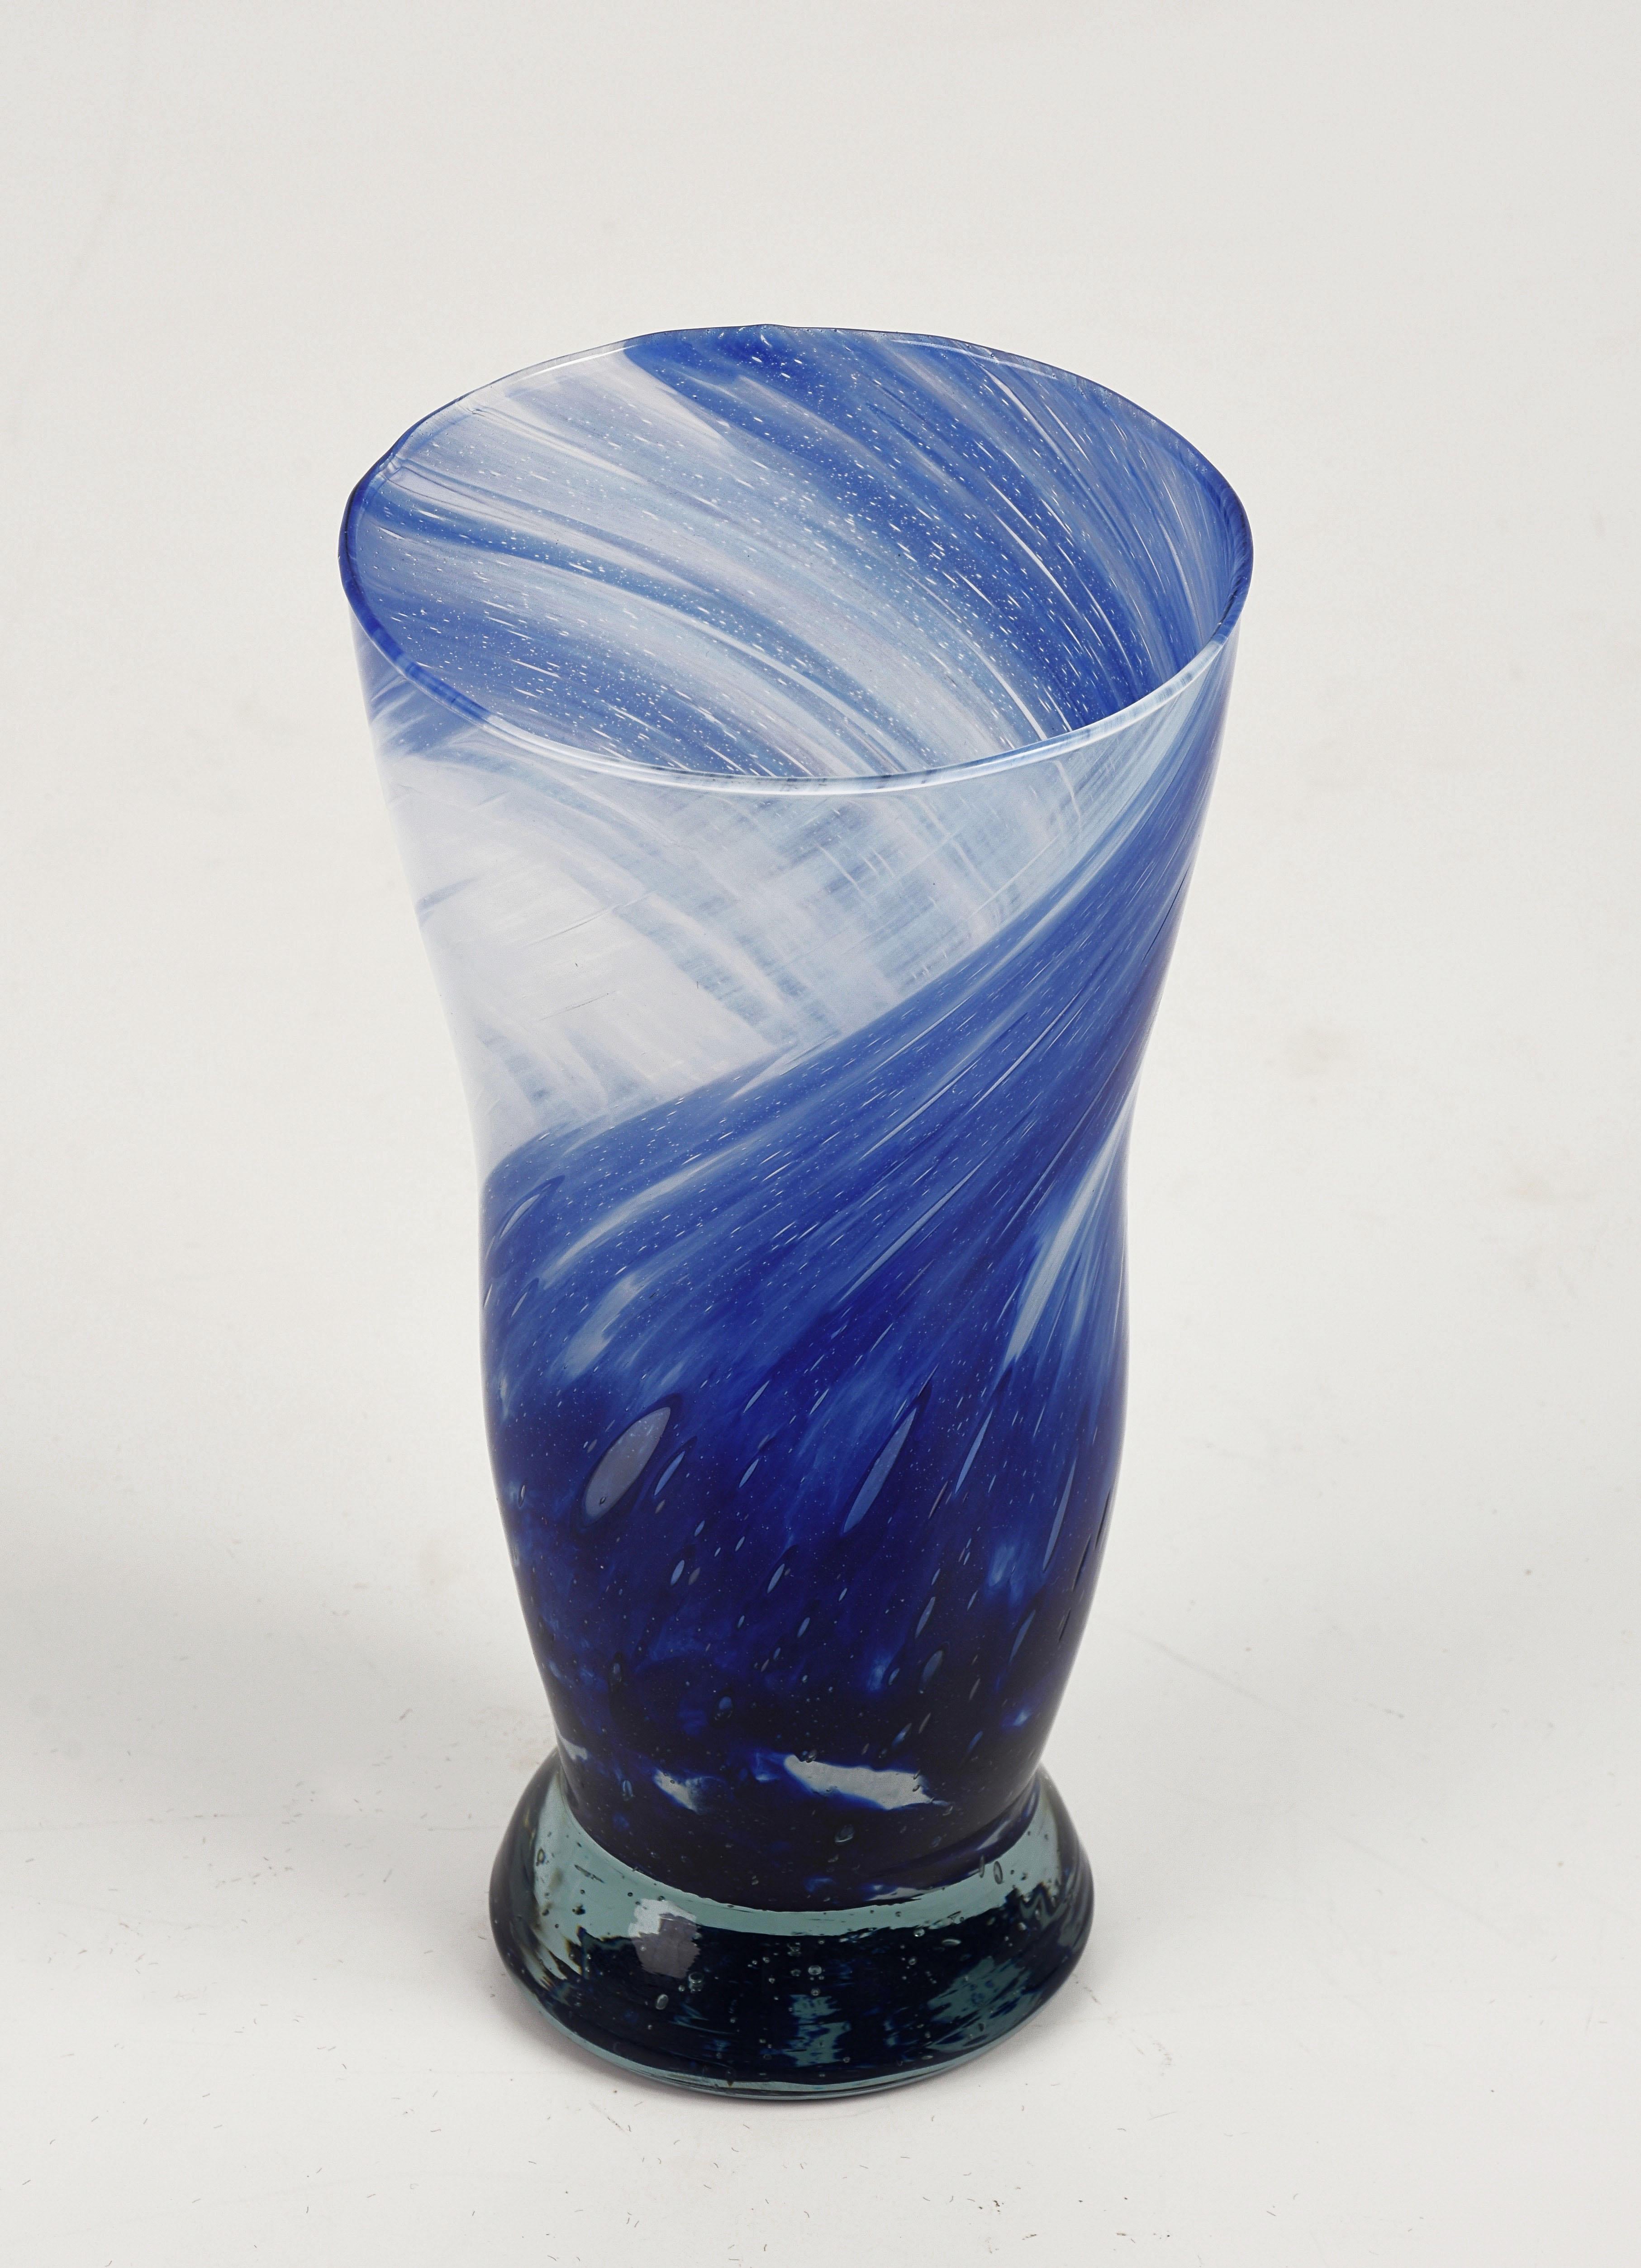 Amazing crystal and light blue Murano glass vase. This item is attributed to Venini and was produced in Italy during 1960s.

This wonderful item, like the entire Venini production, is handmade and blown, delivering a mindblowing final